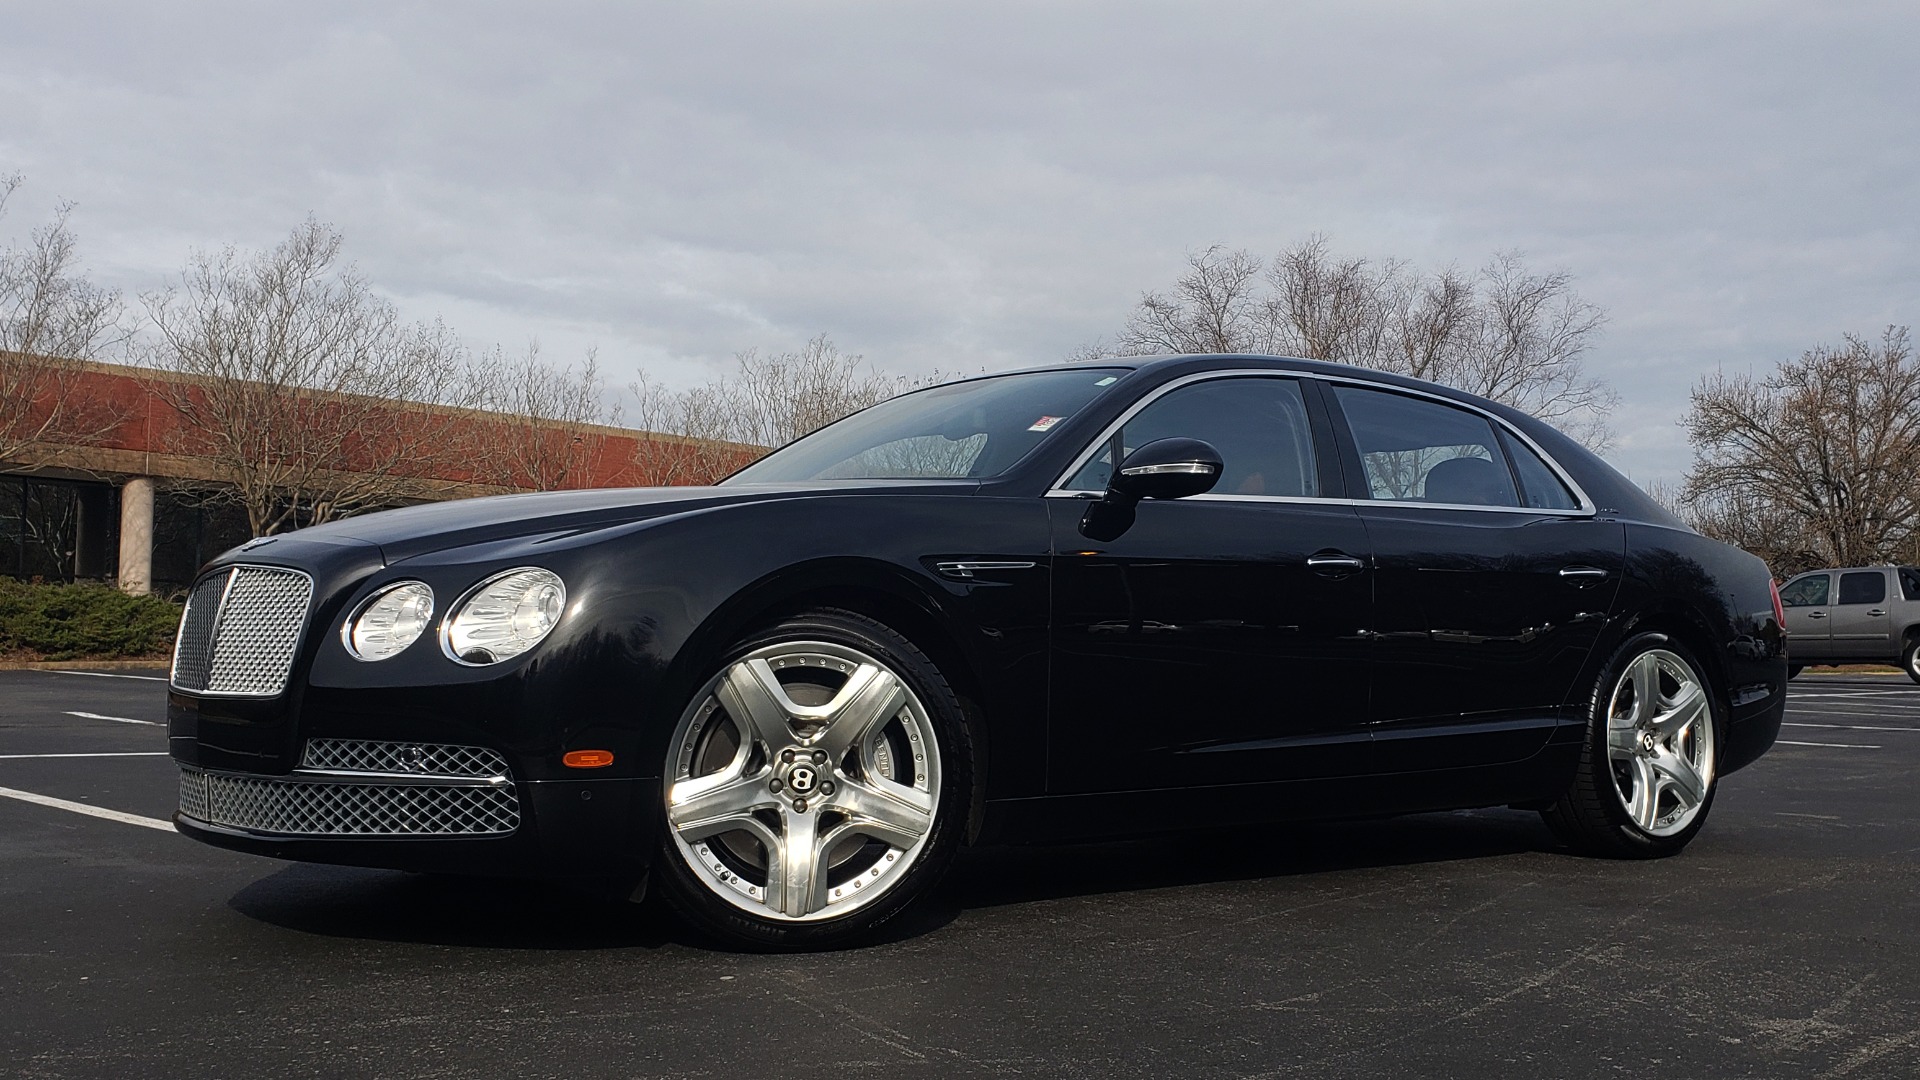 Used 14 Bentley Flying Spur W12 8 Spd Awd Nav Mulliner Driving Spec For Sale 79 999 Formula Imports Stock Fc9685